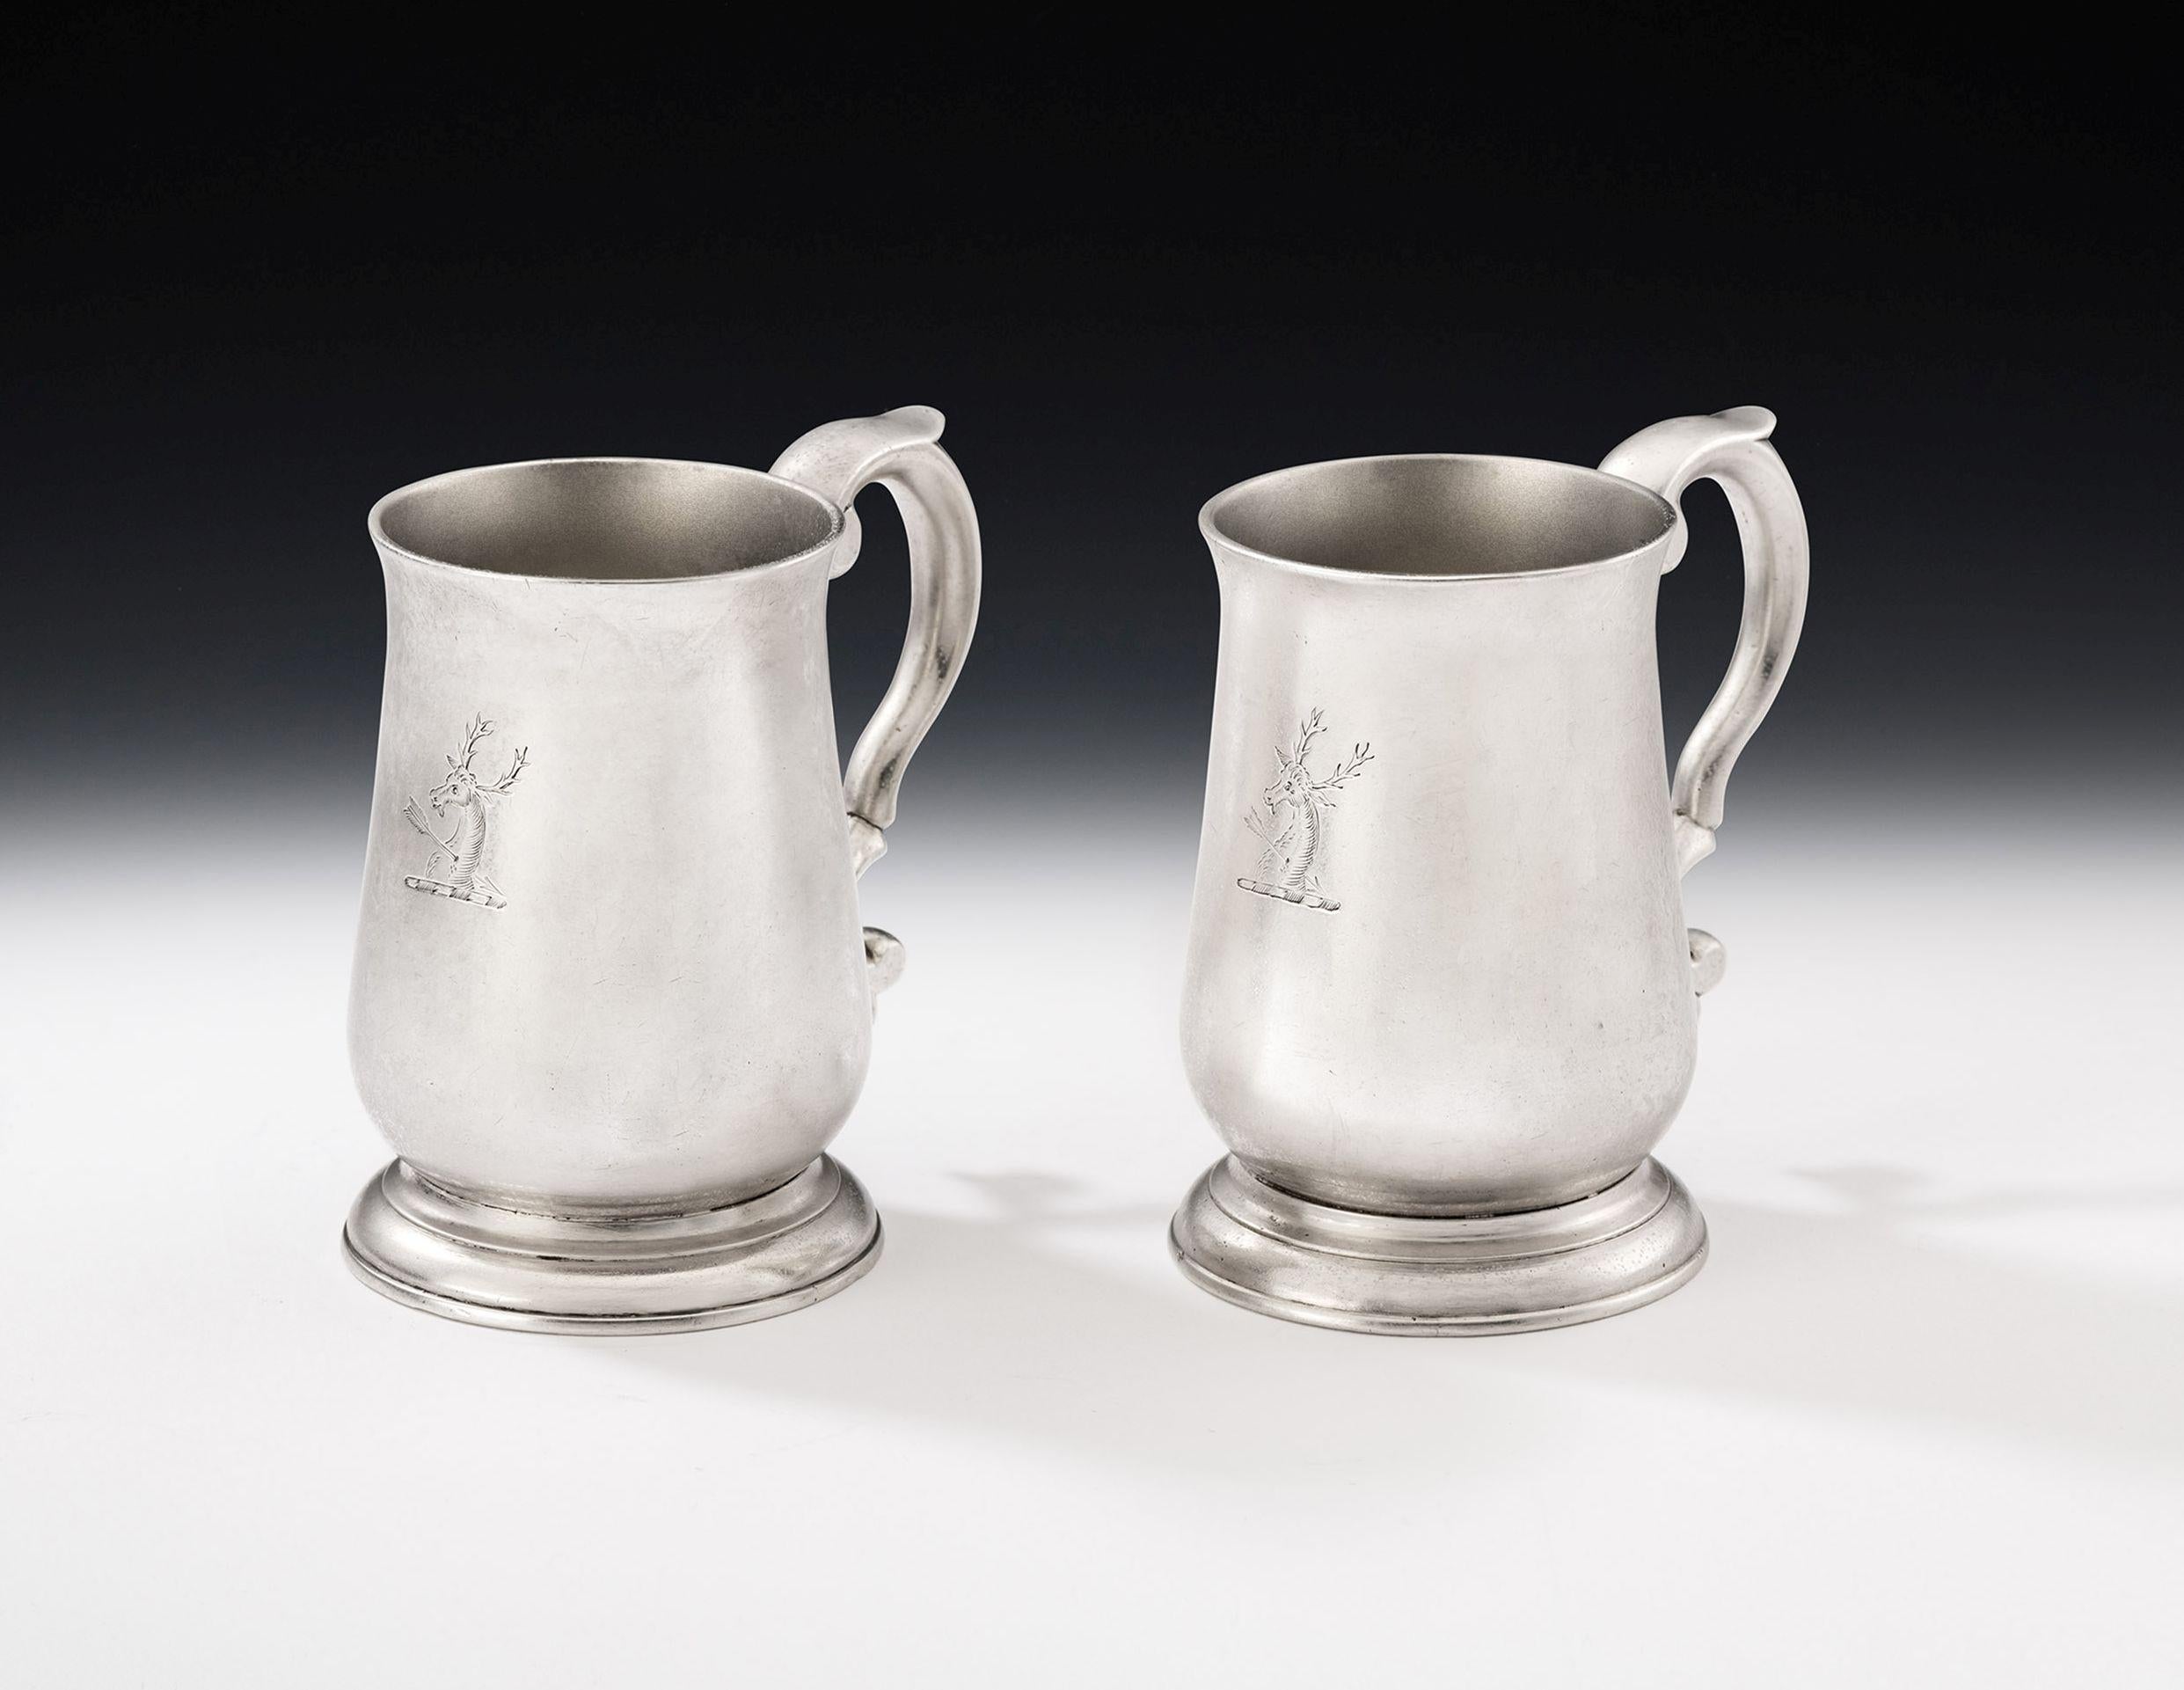 CHESTER - AN EXCEPTIONALLY RARE PAIR OF EARLY GEORGE III DRINKING MUGS MADE IN CHESTER IN 1765 BY RICHARD RICHARDSON II.

The Mugs are modelled in a style which is seldom seen from Chester. Each stands on a spreading moulded foot, decorated with